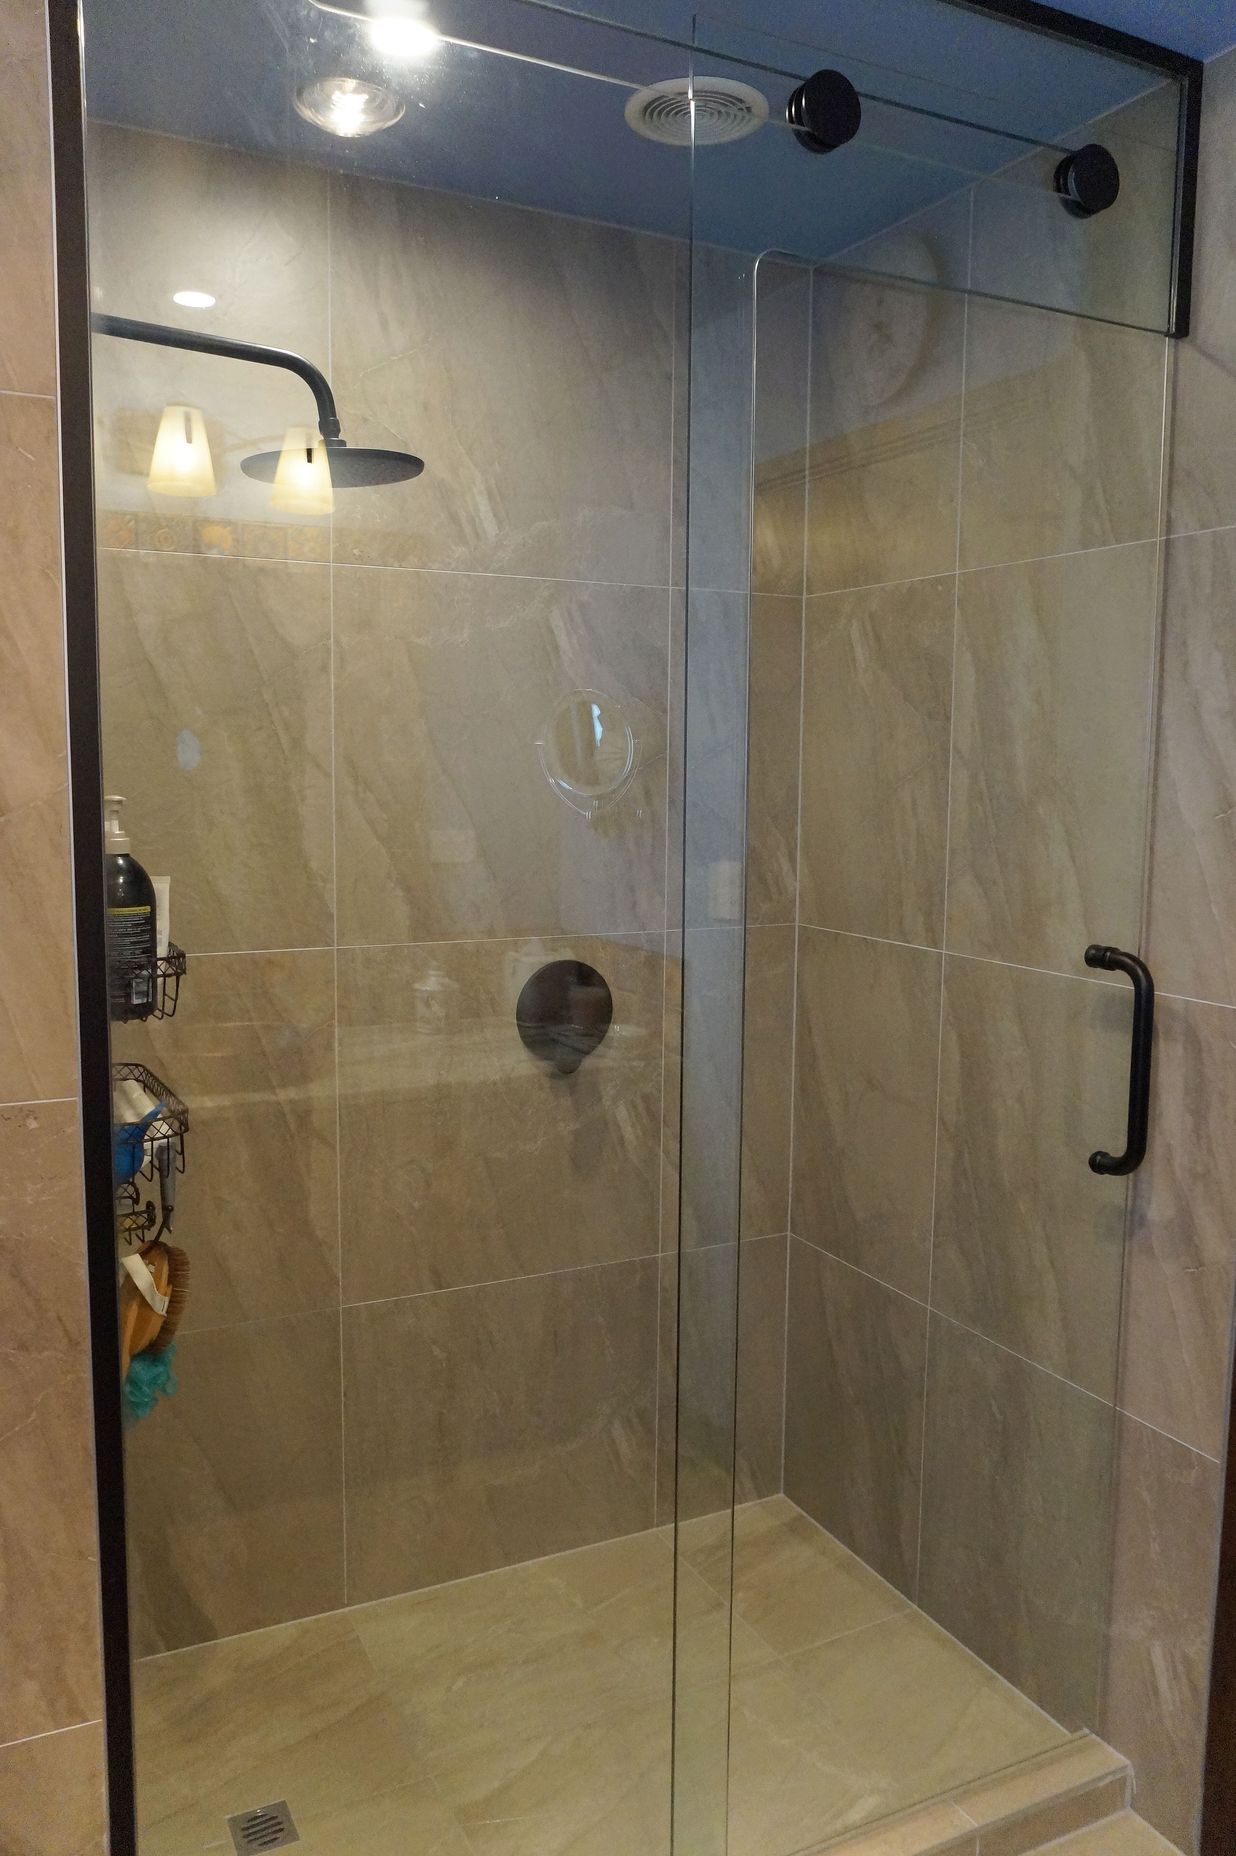 This tiled shower was renovated with a floor to ceiling glass door to make the bathroom look more open and spacious – Bathroom renovation in Stanmore Bay, Auckland